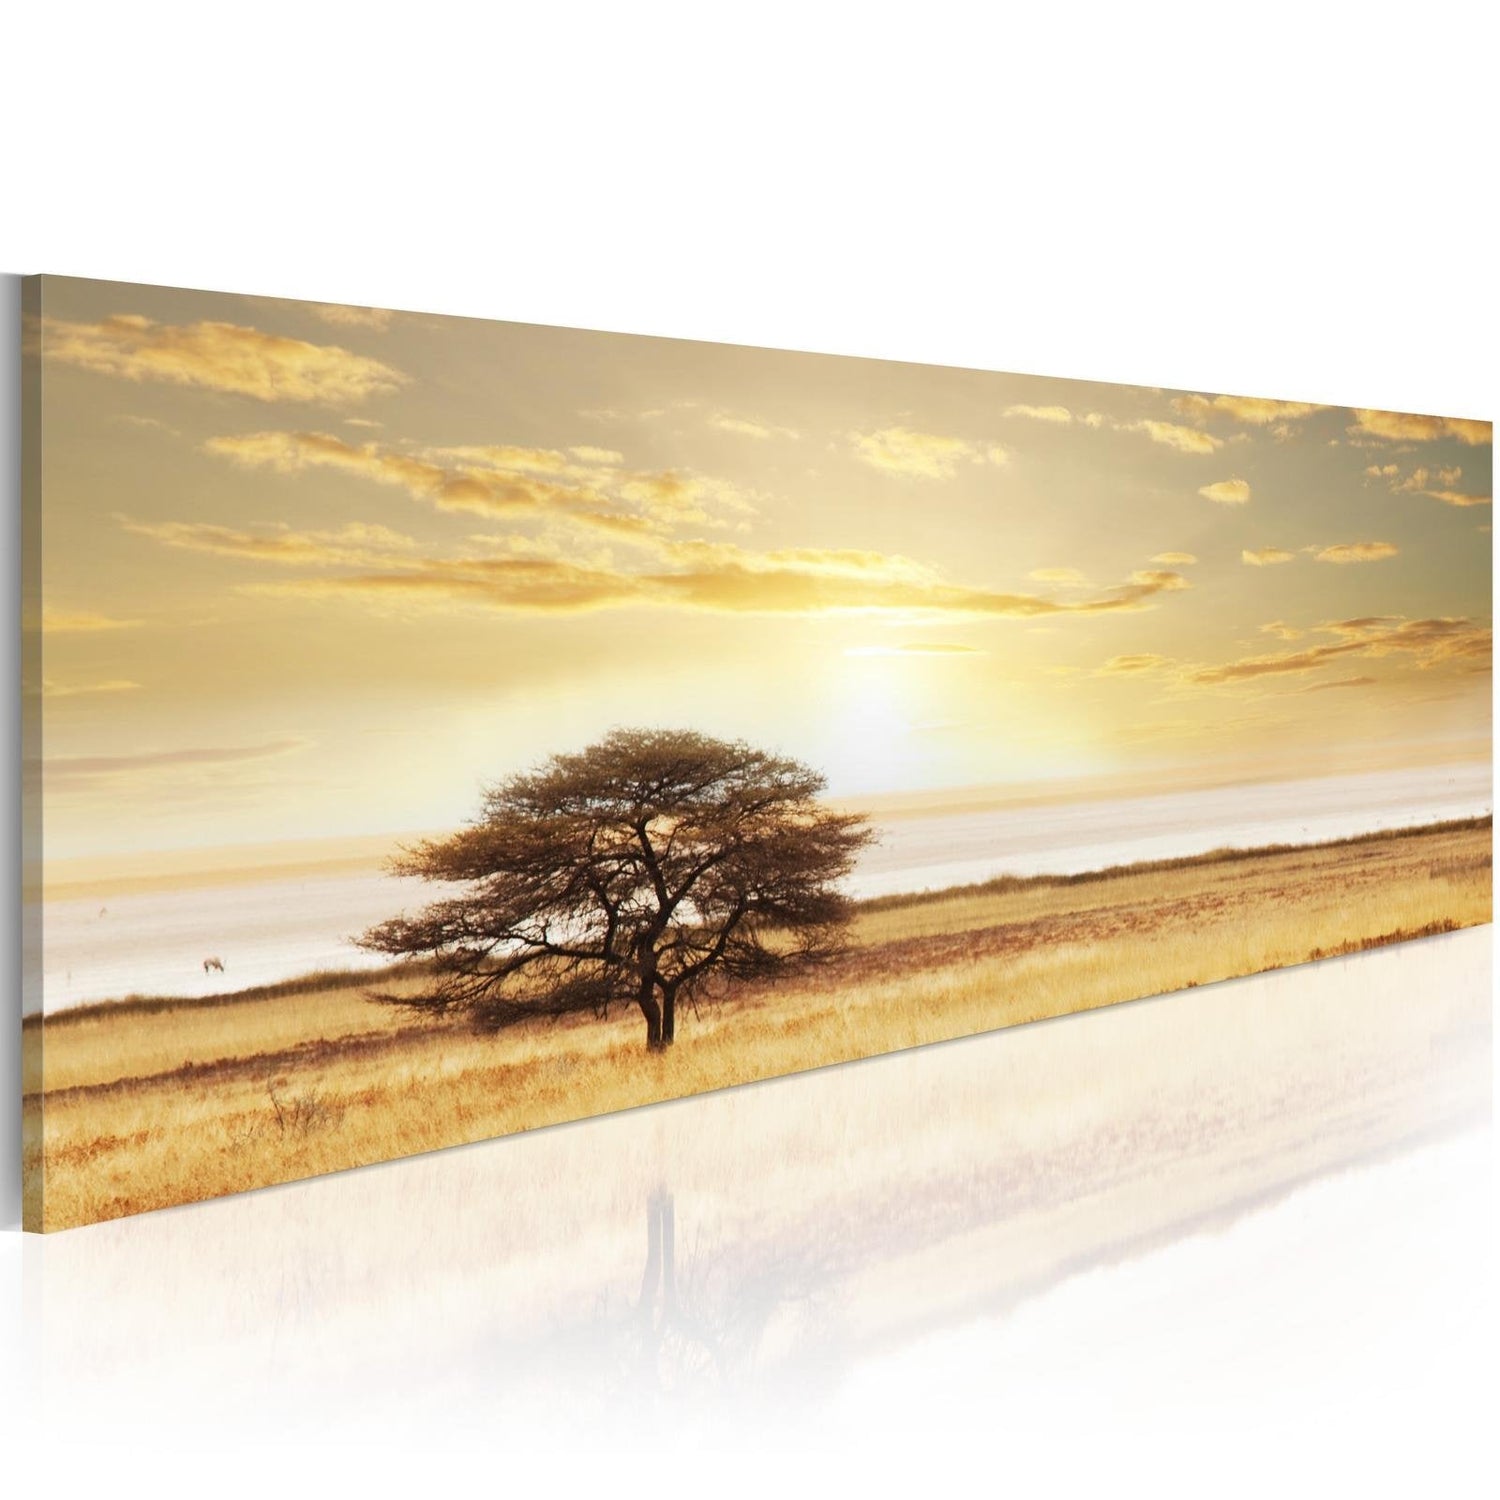 Stretched Canvas Landscape Art - Lonely Tree On Savannah-Tiptophomedecor